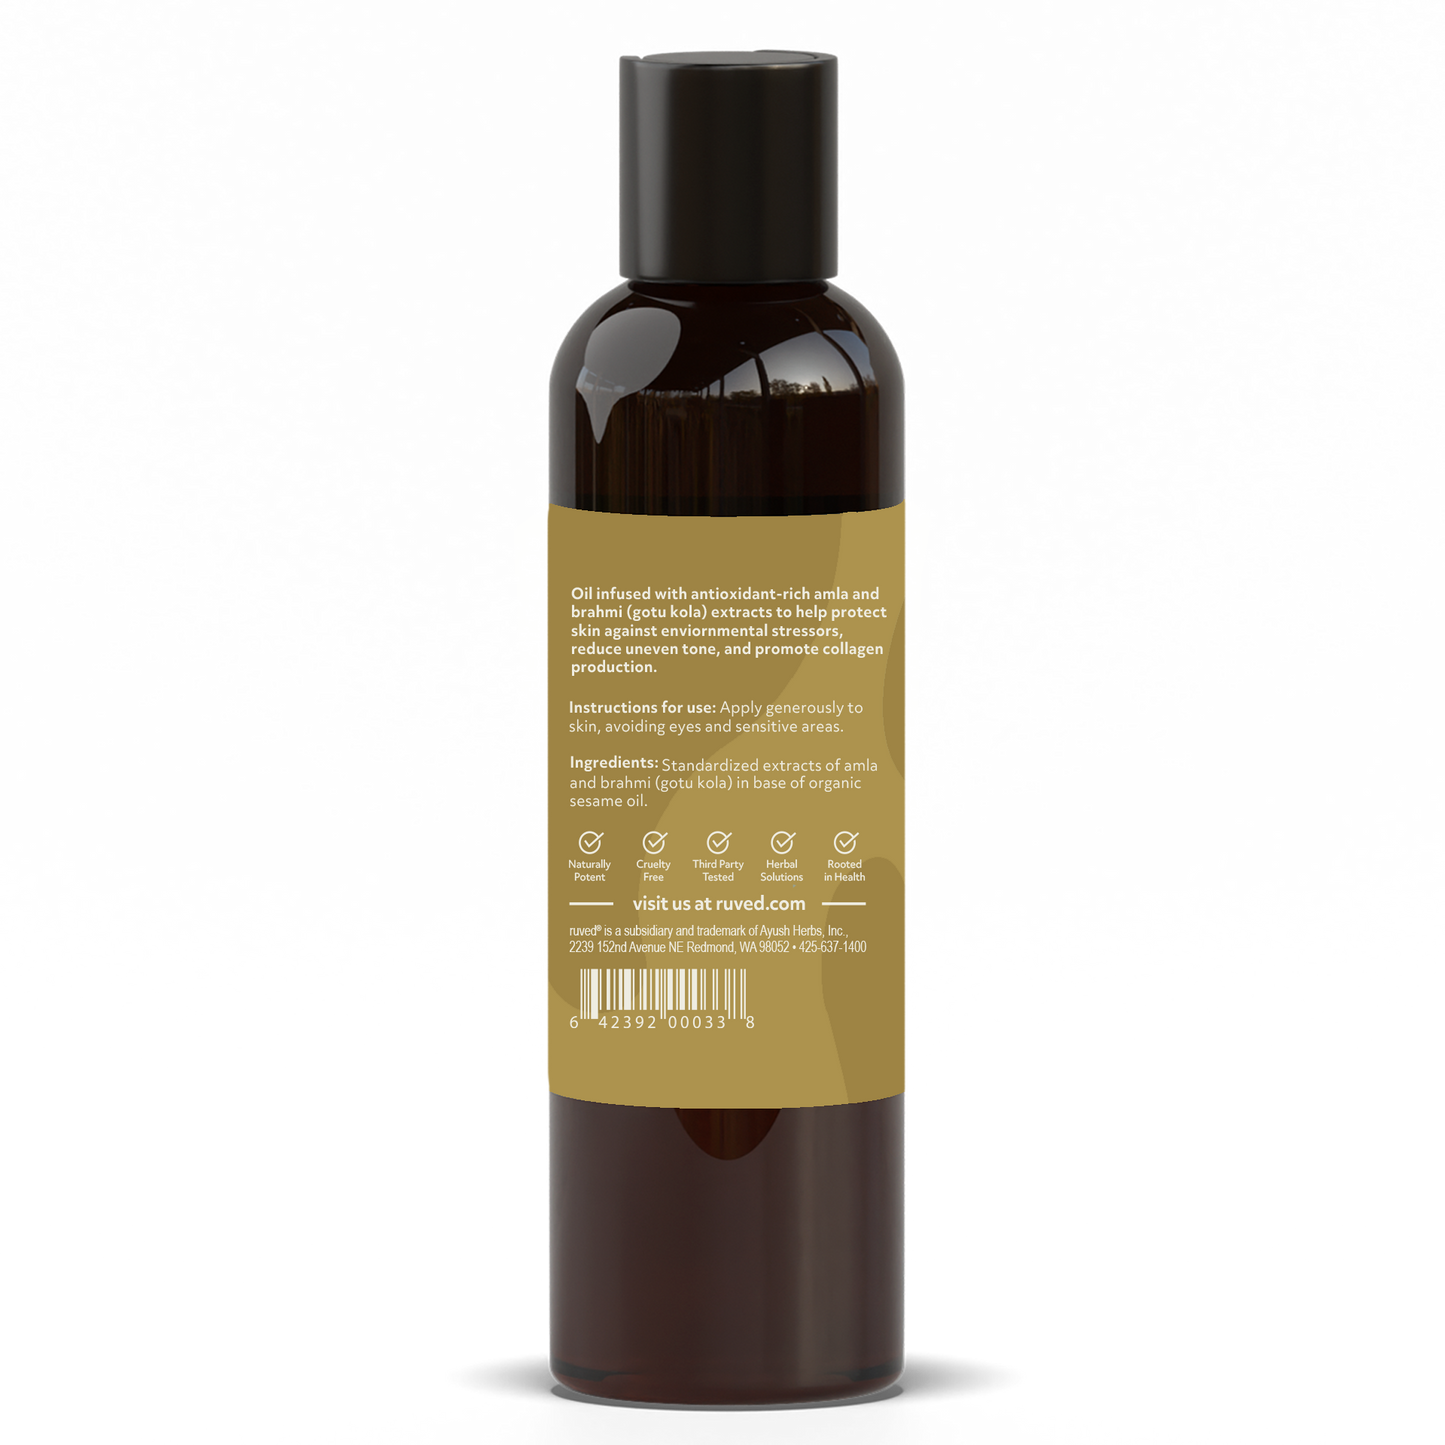 healthy aging body Oil infused with antioxidant-rich amla and brahmi by ruved herbal supplements and ayush herbs